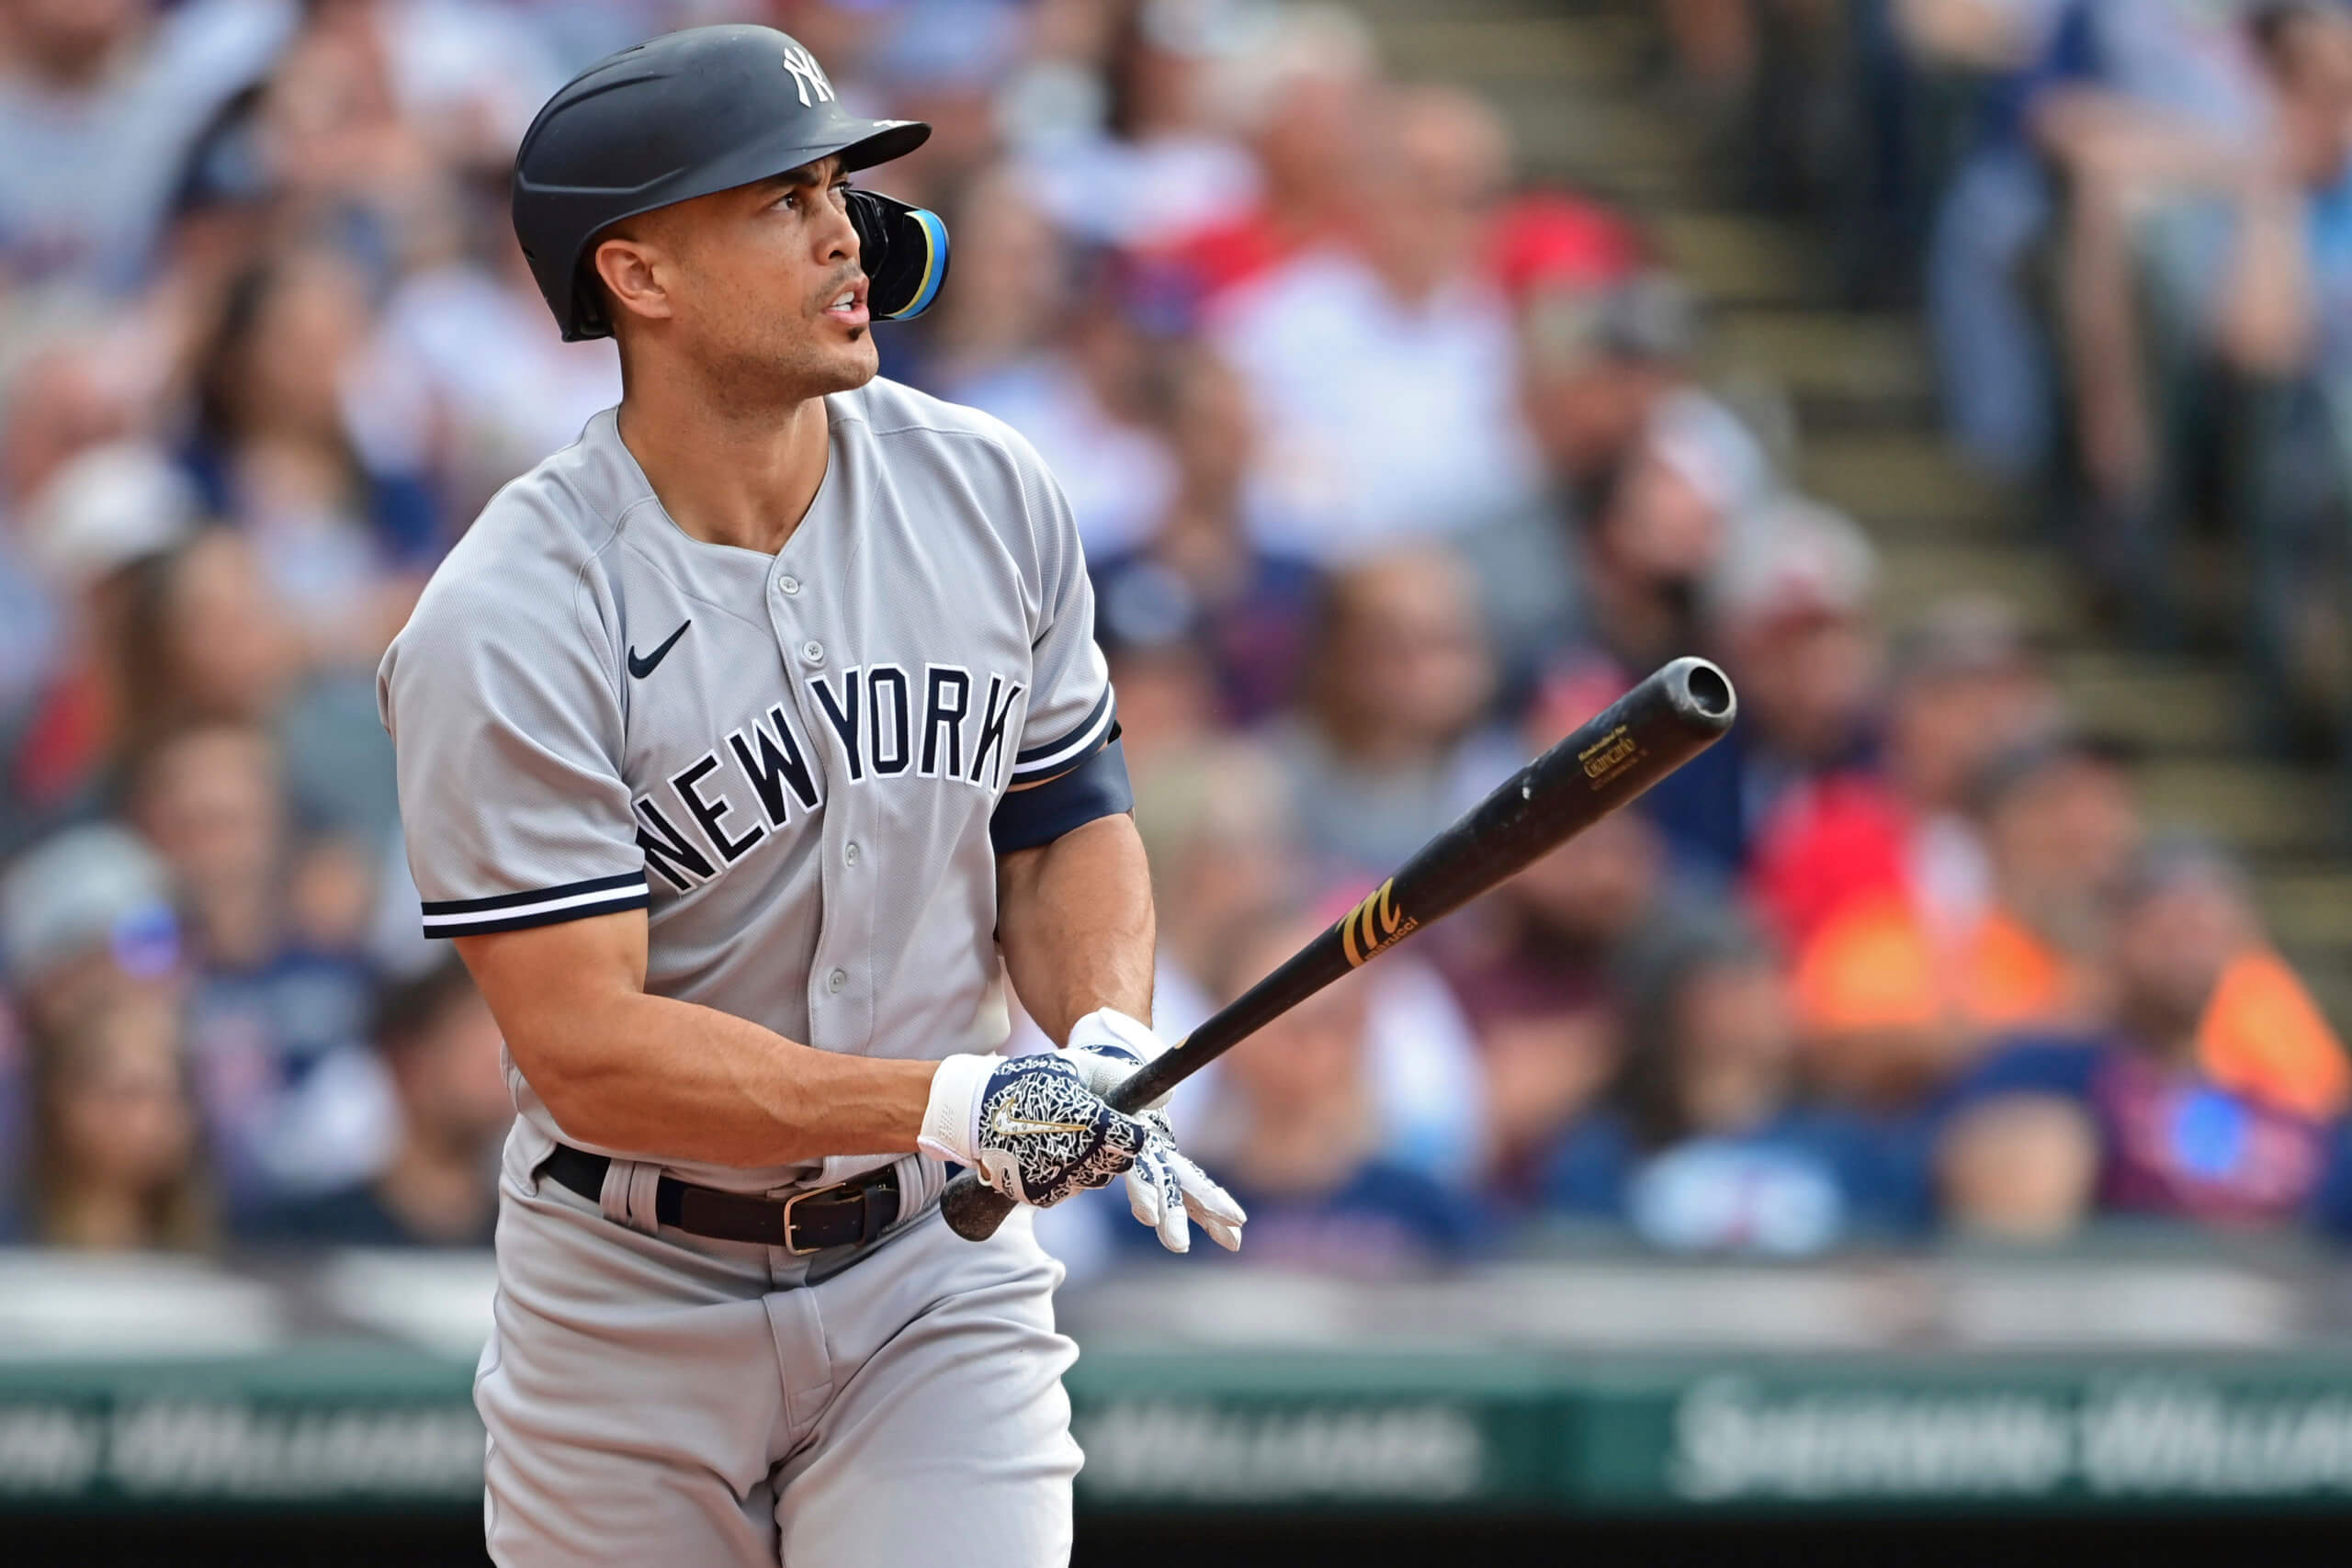 Giancarlo Stanton looks primed for a big year for the Yankees